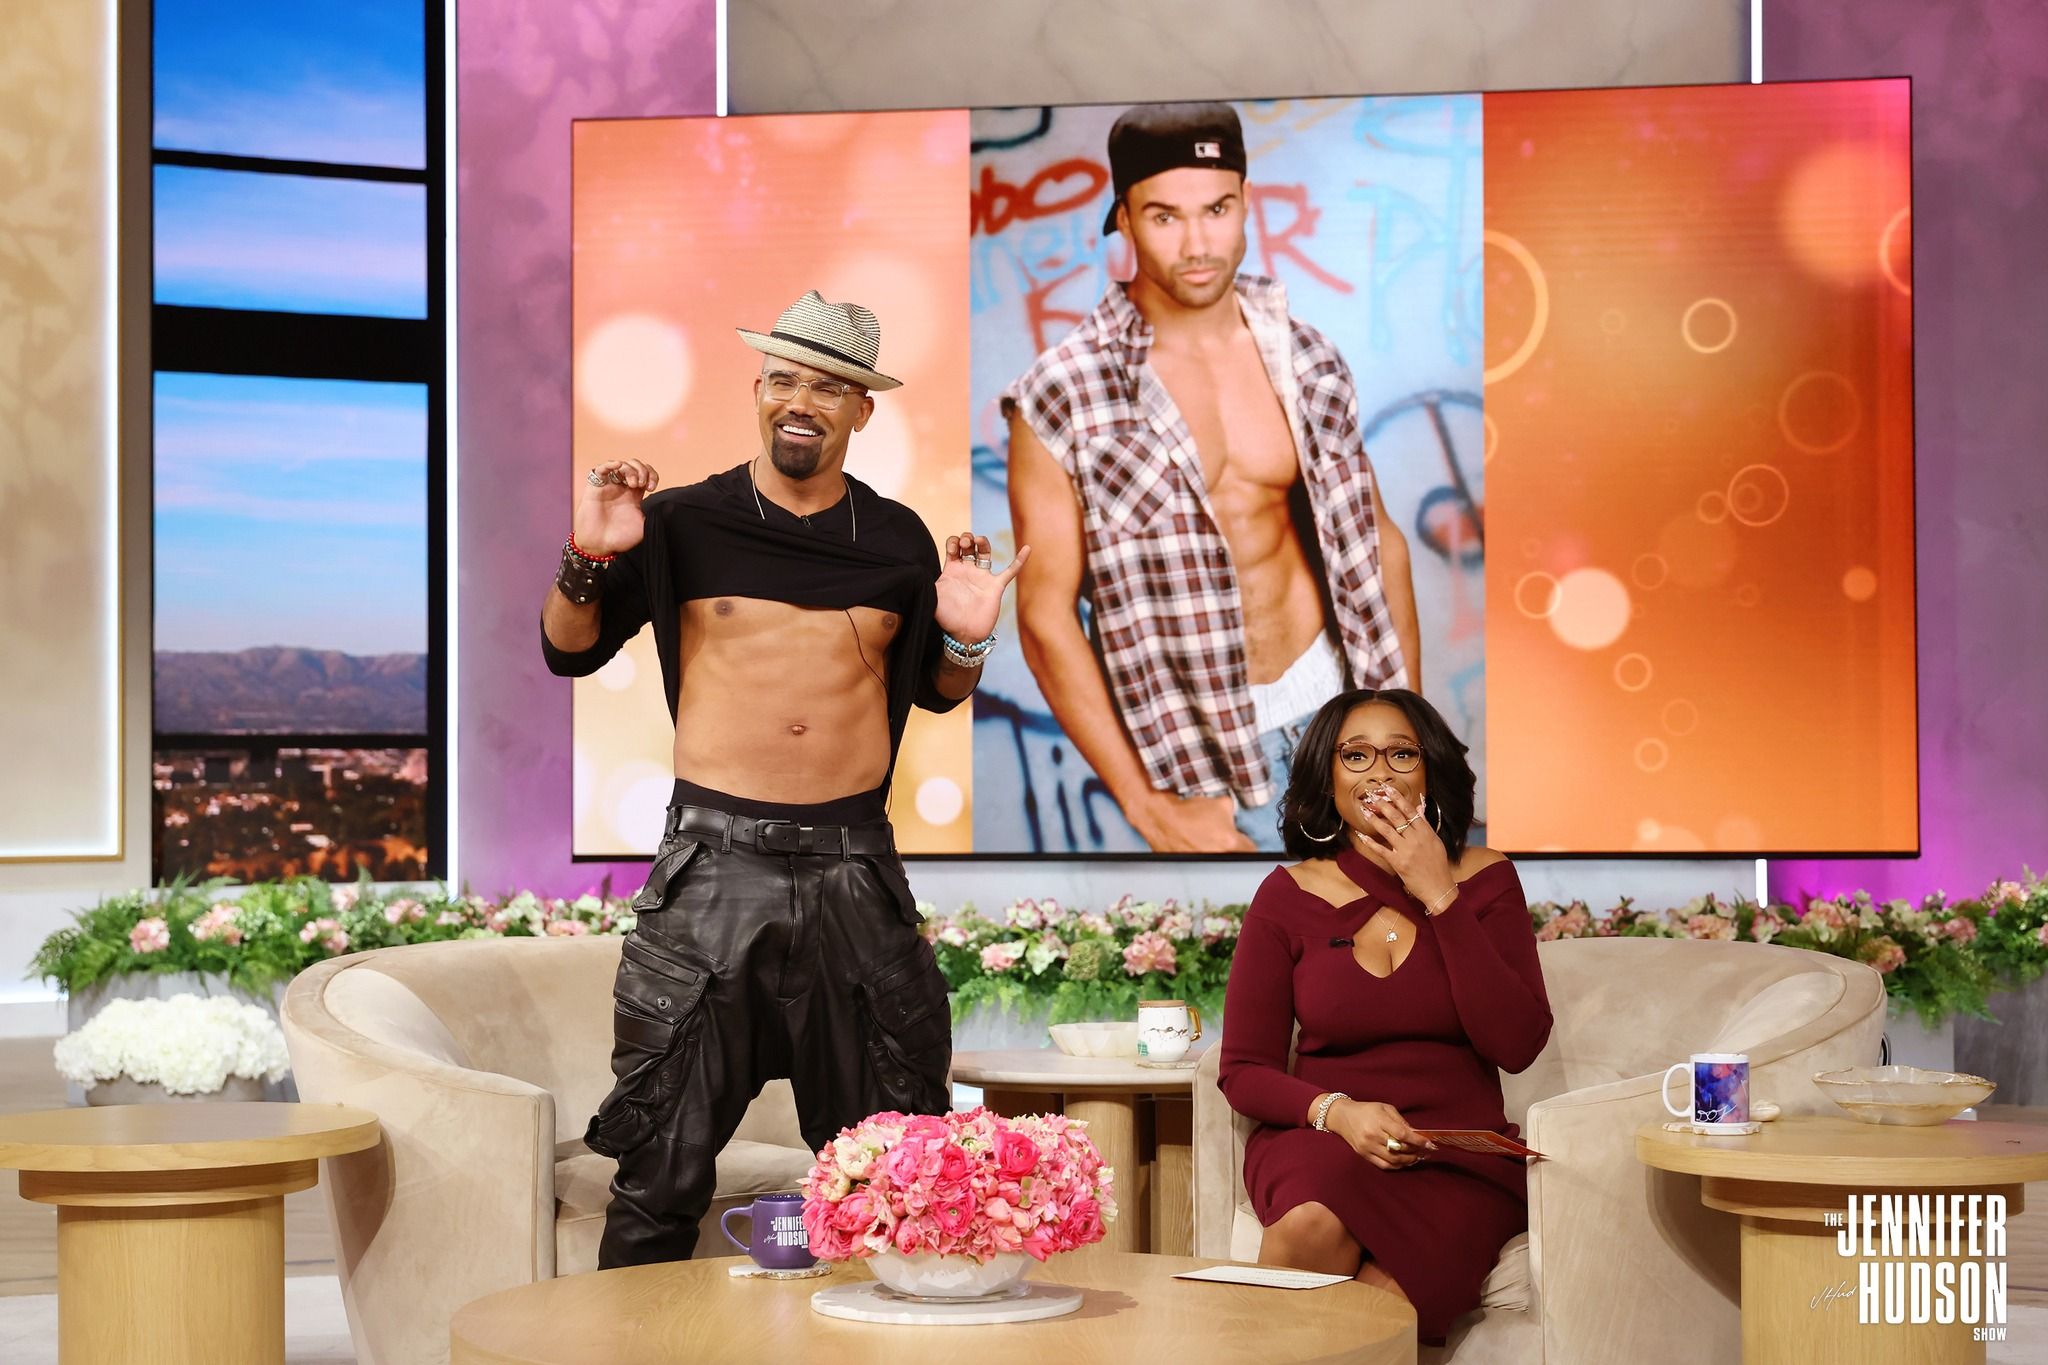 Shemar Moore Shows What He’s Working With On Jennifer Hudson Show